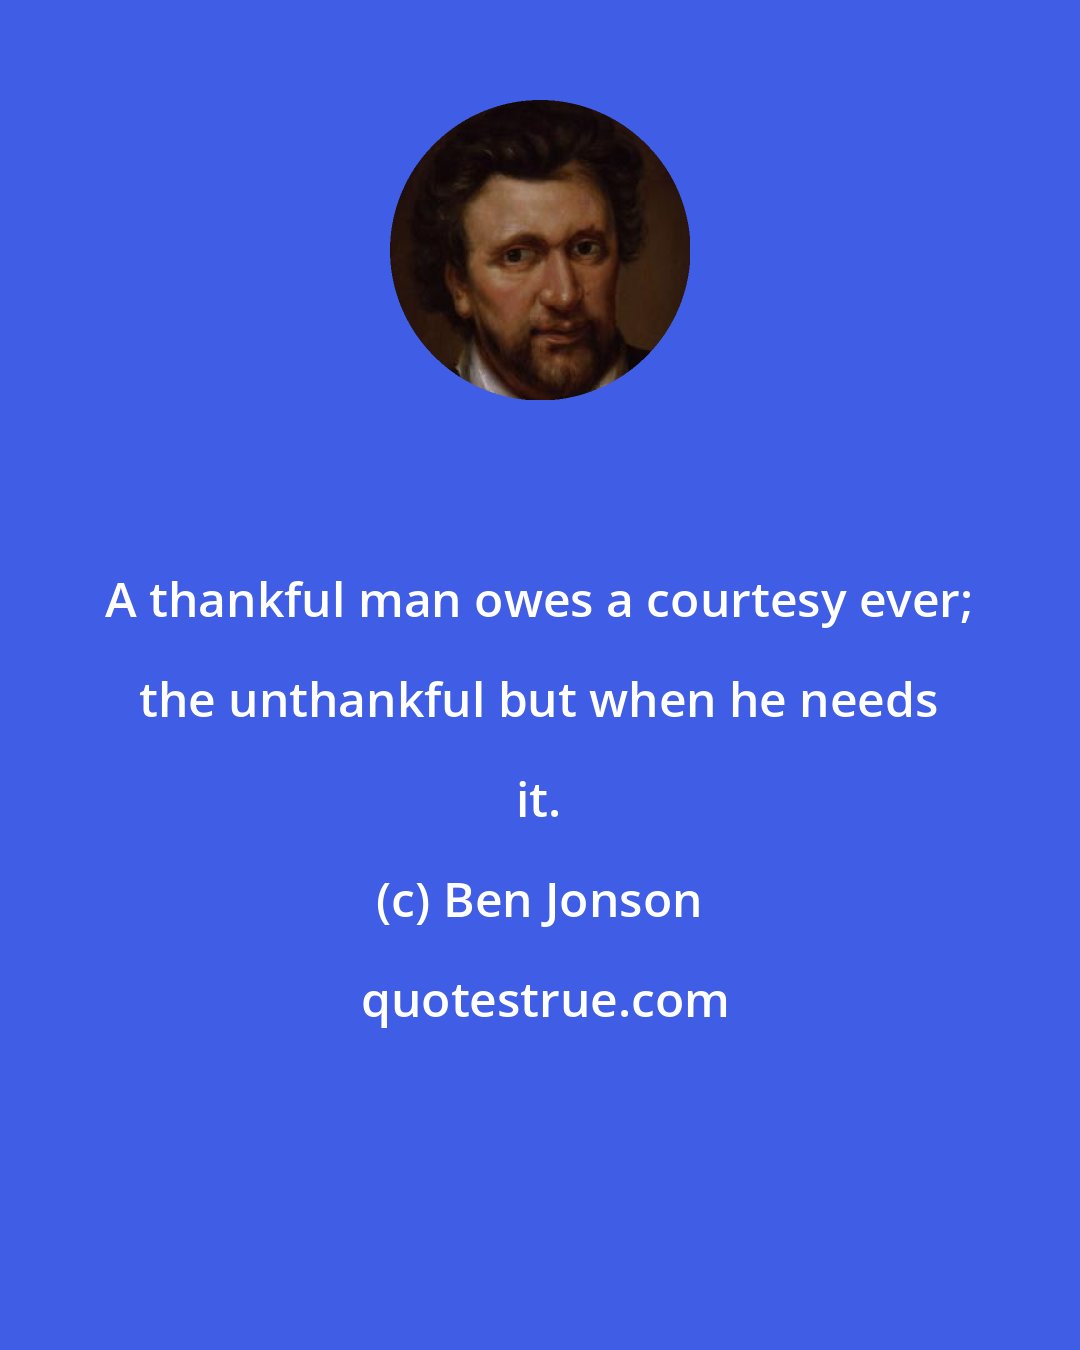 Ben Jonson: A thankful man owes a courtesy ever; the unthankful but when he needs it.